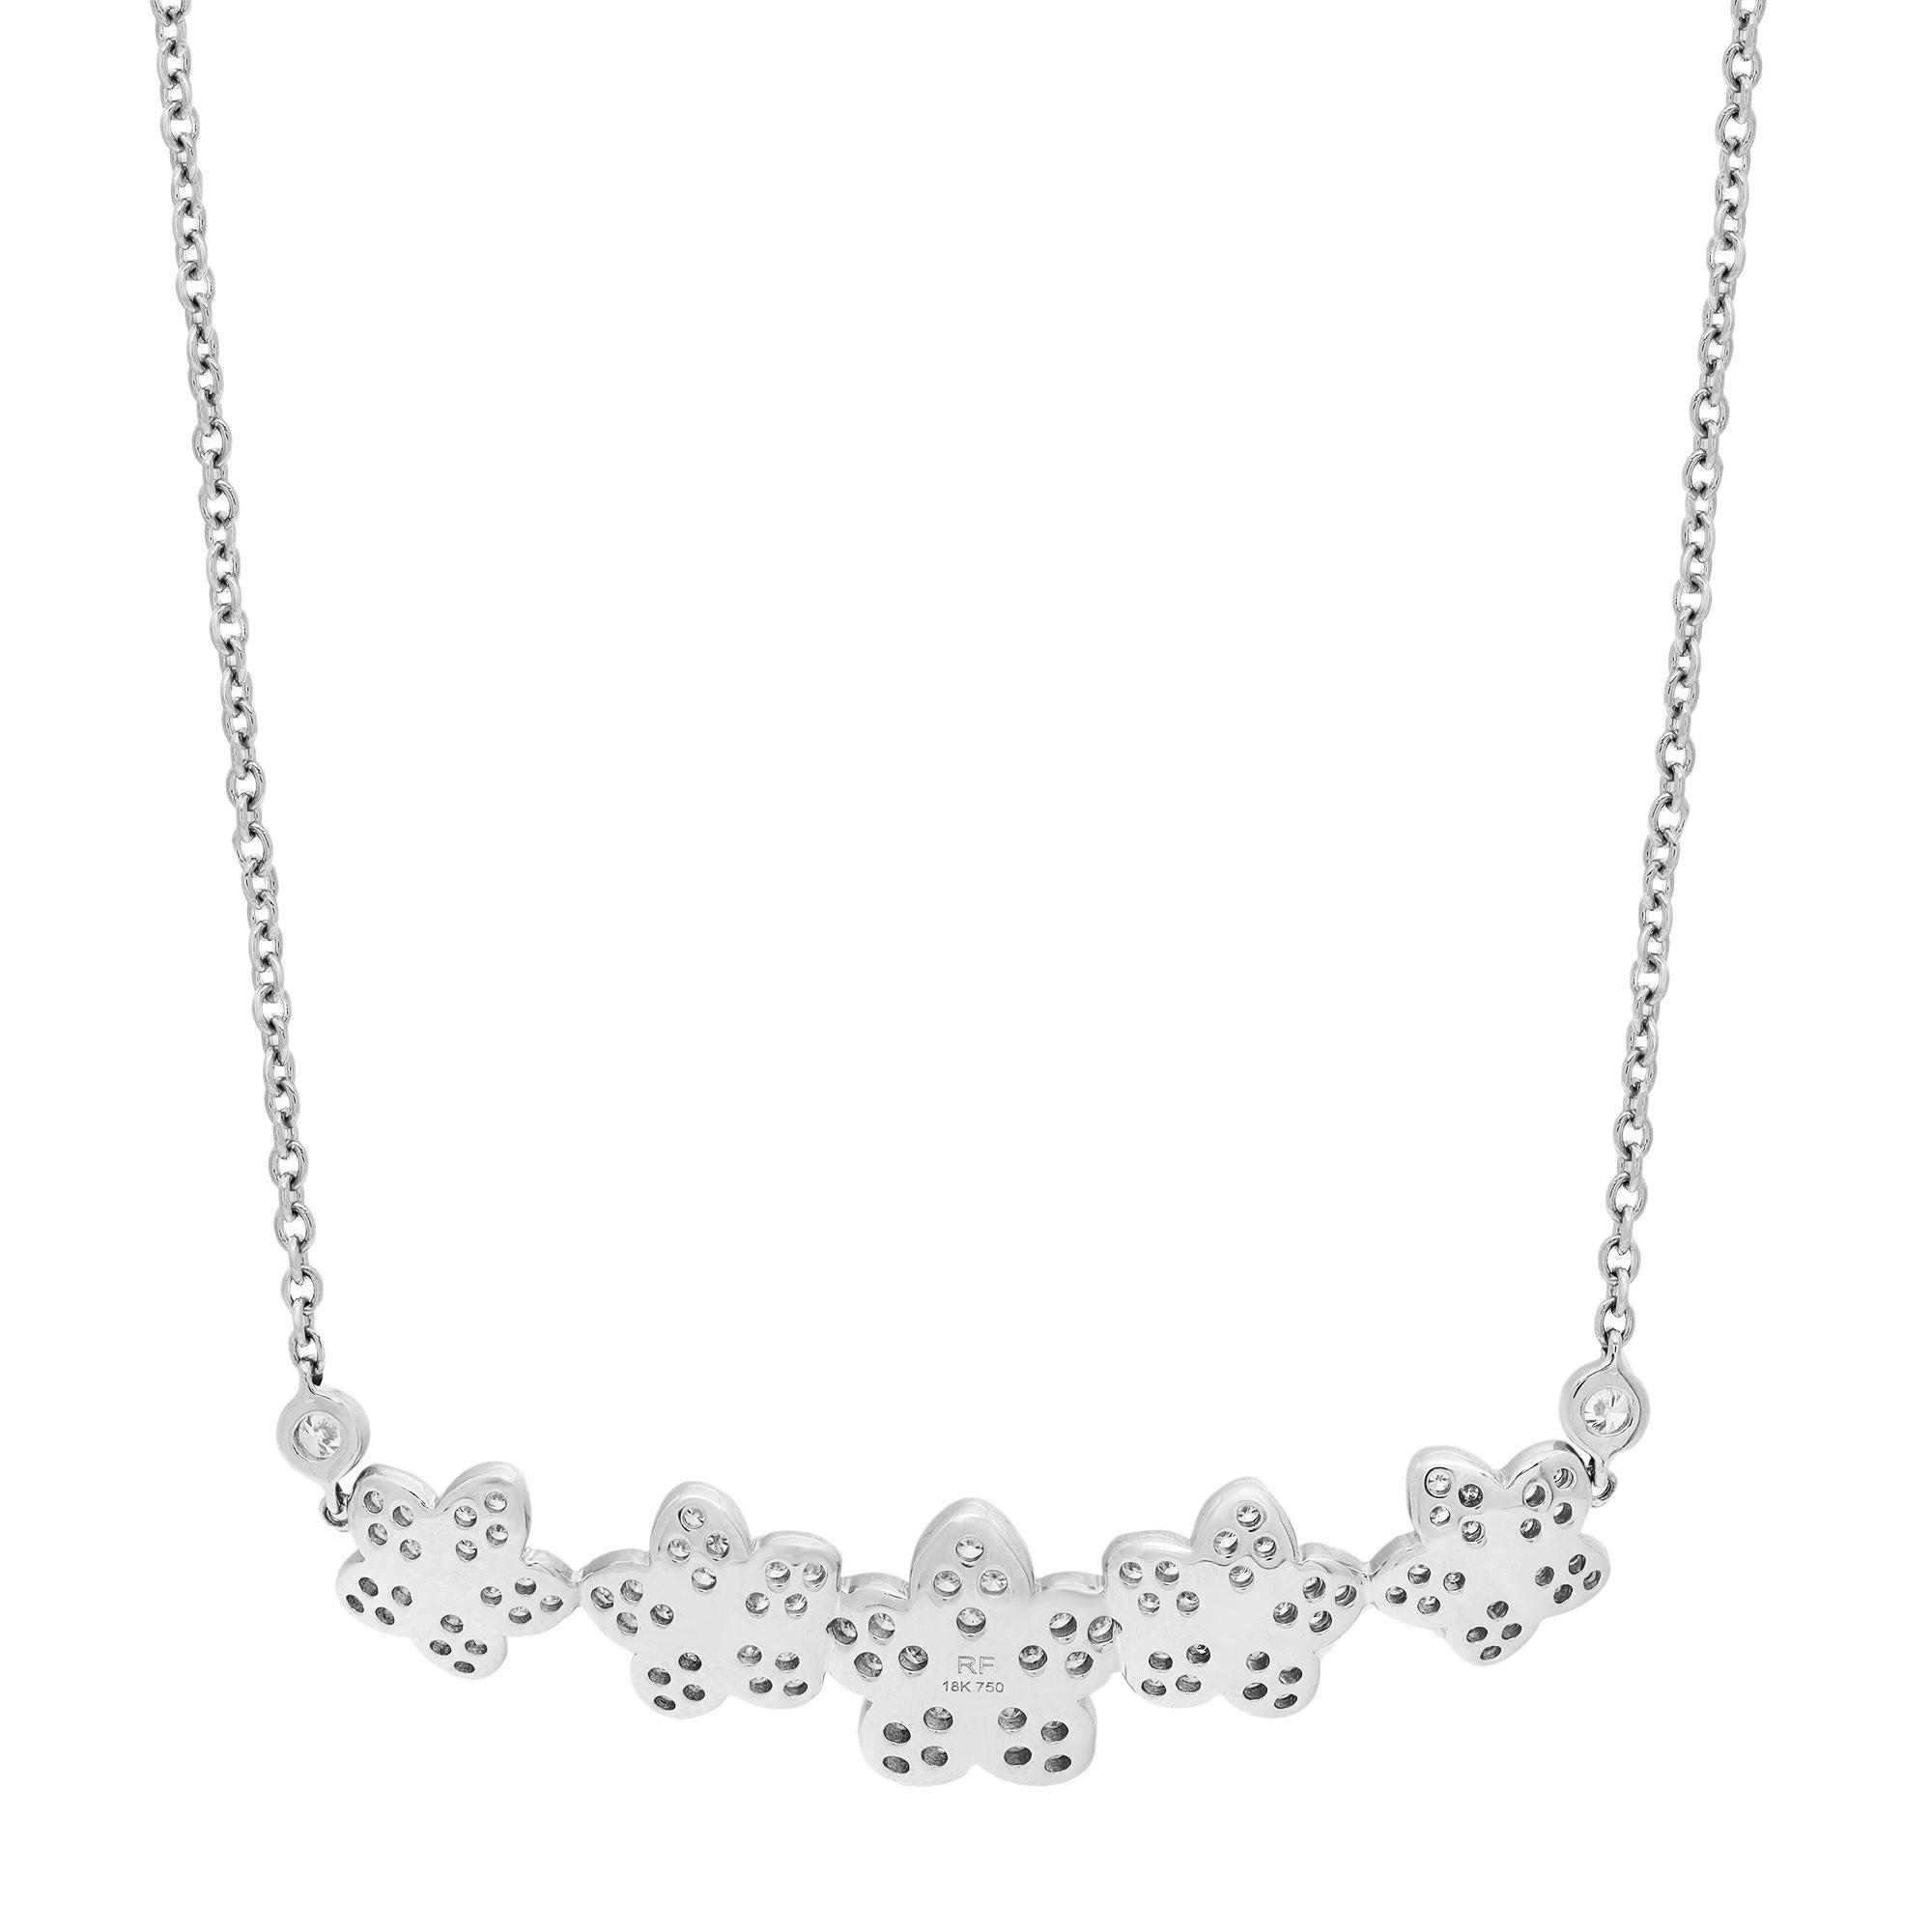 Modern 0.90Cttw Round Cut Diamond Floral Bar Necklace 18K White Gold 18 Inches For Sale